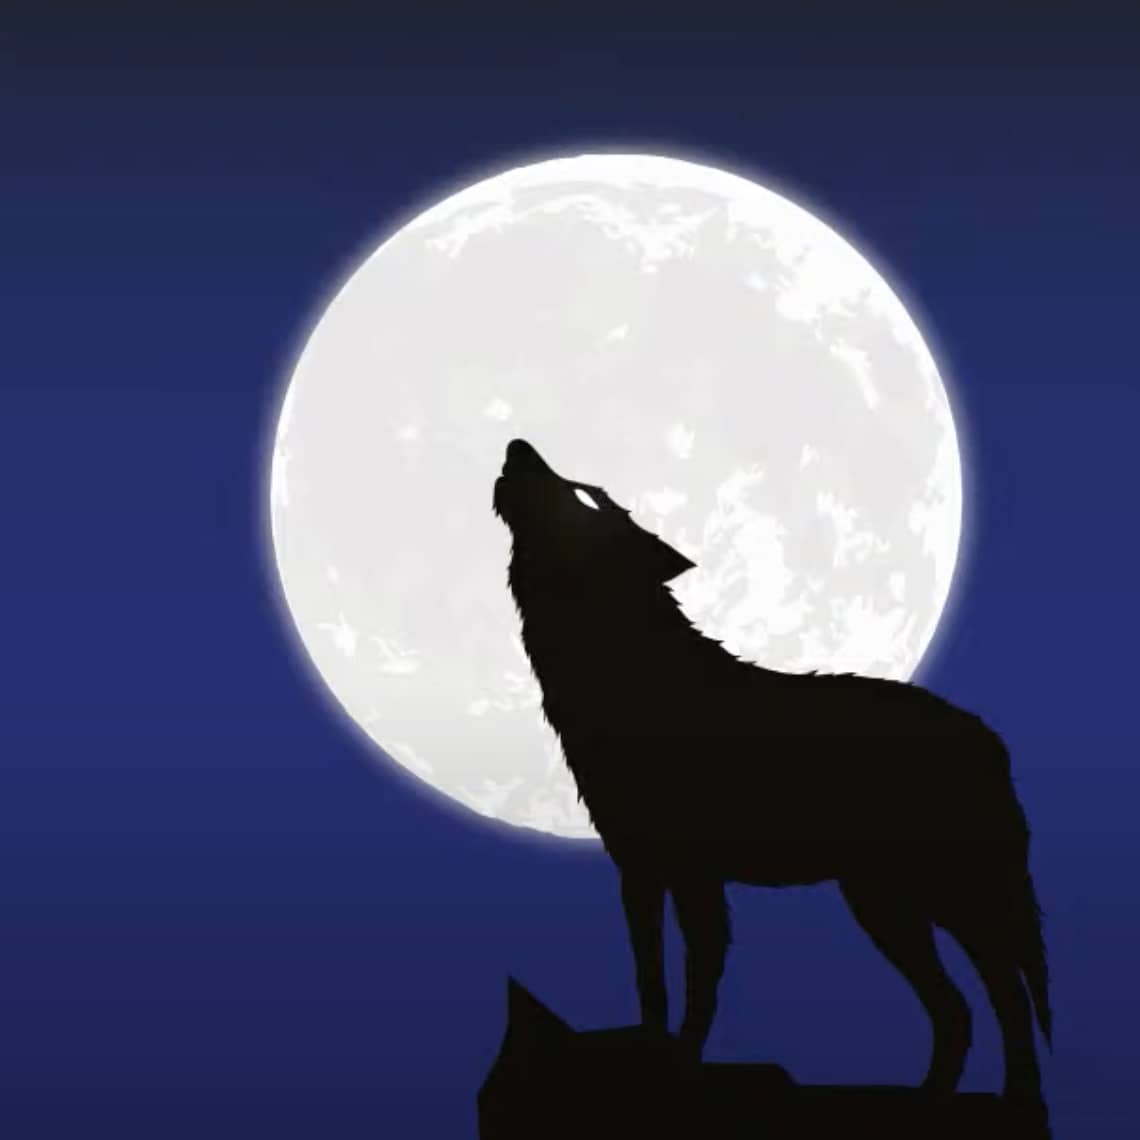 MacBite After Hours howling wolf logo.